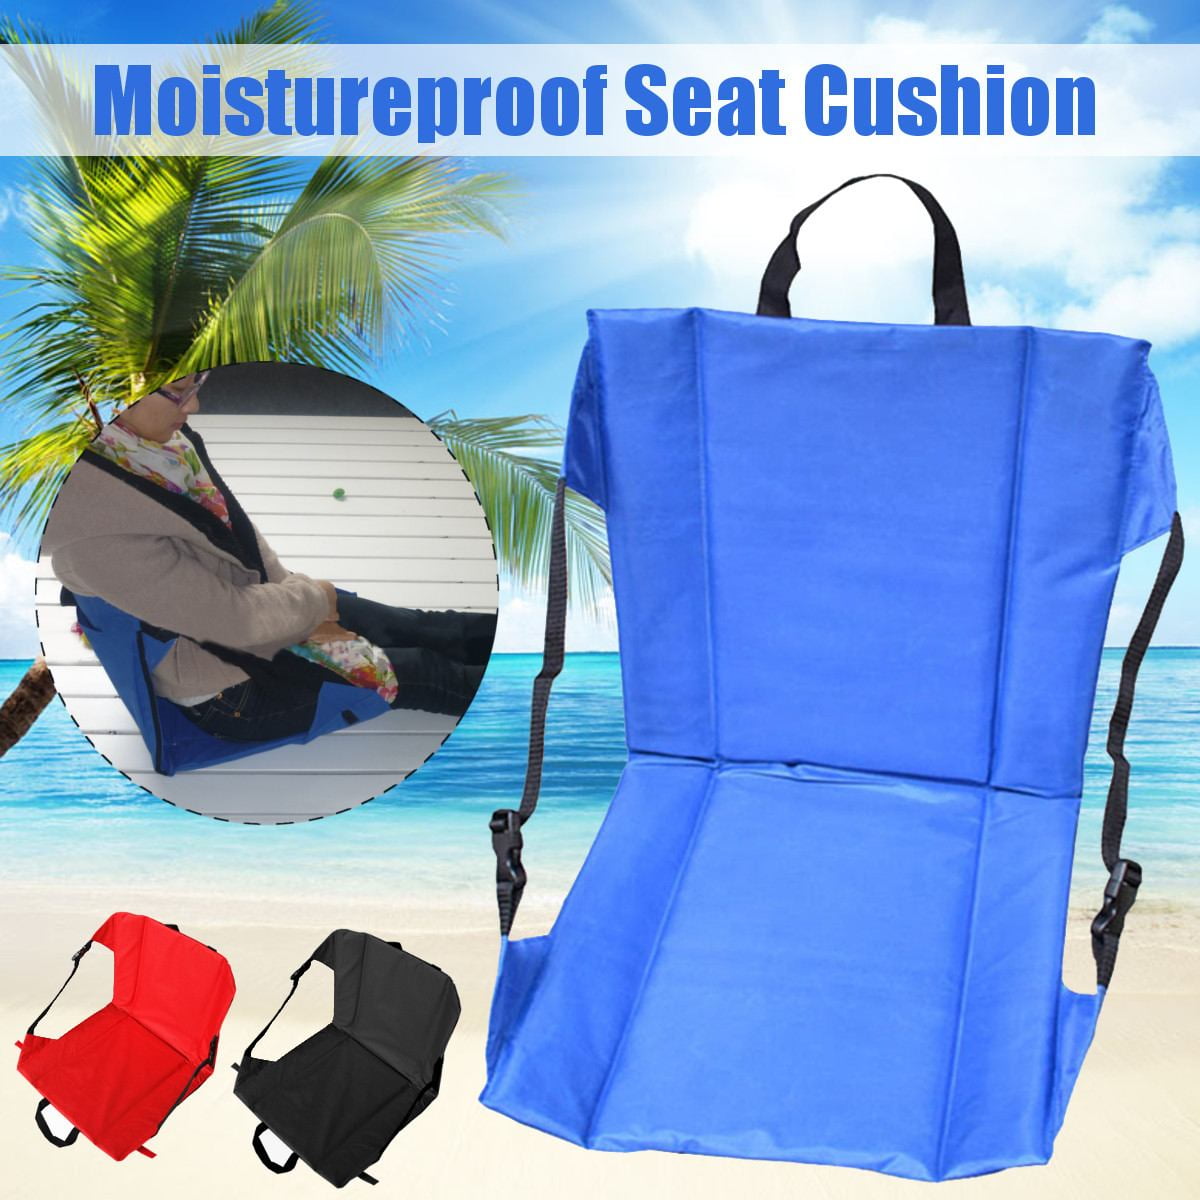 Stadium Seat Cushion Portable Padded Stadium Seat Cushion Bleacher Chair Camping Picnic Beach Cushion Outdoor Sit Mat Lightweight with Back Support 